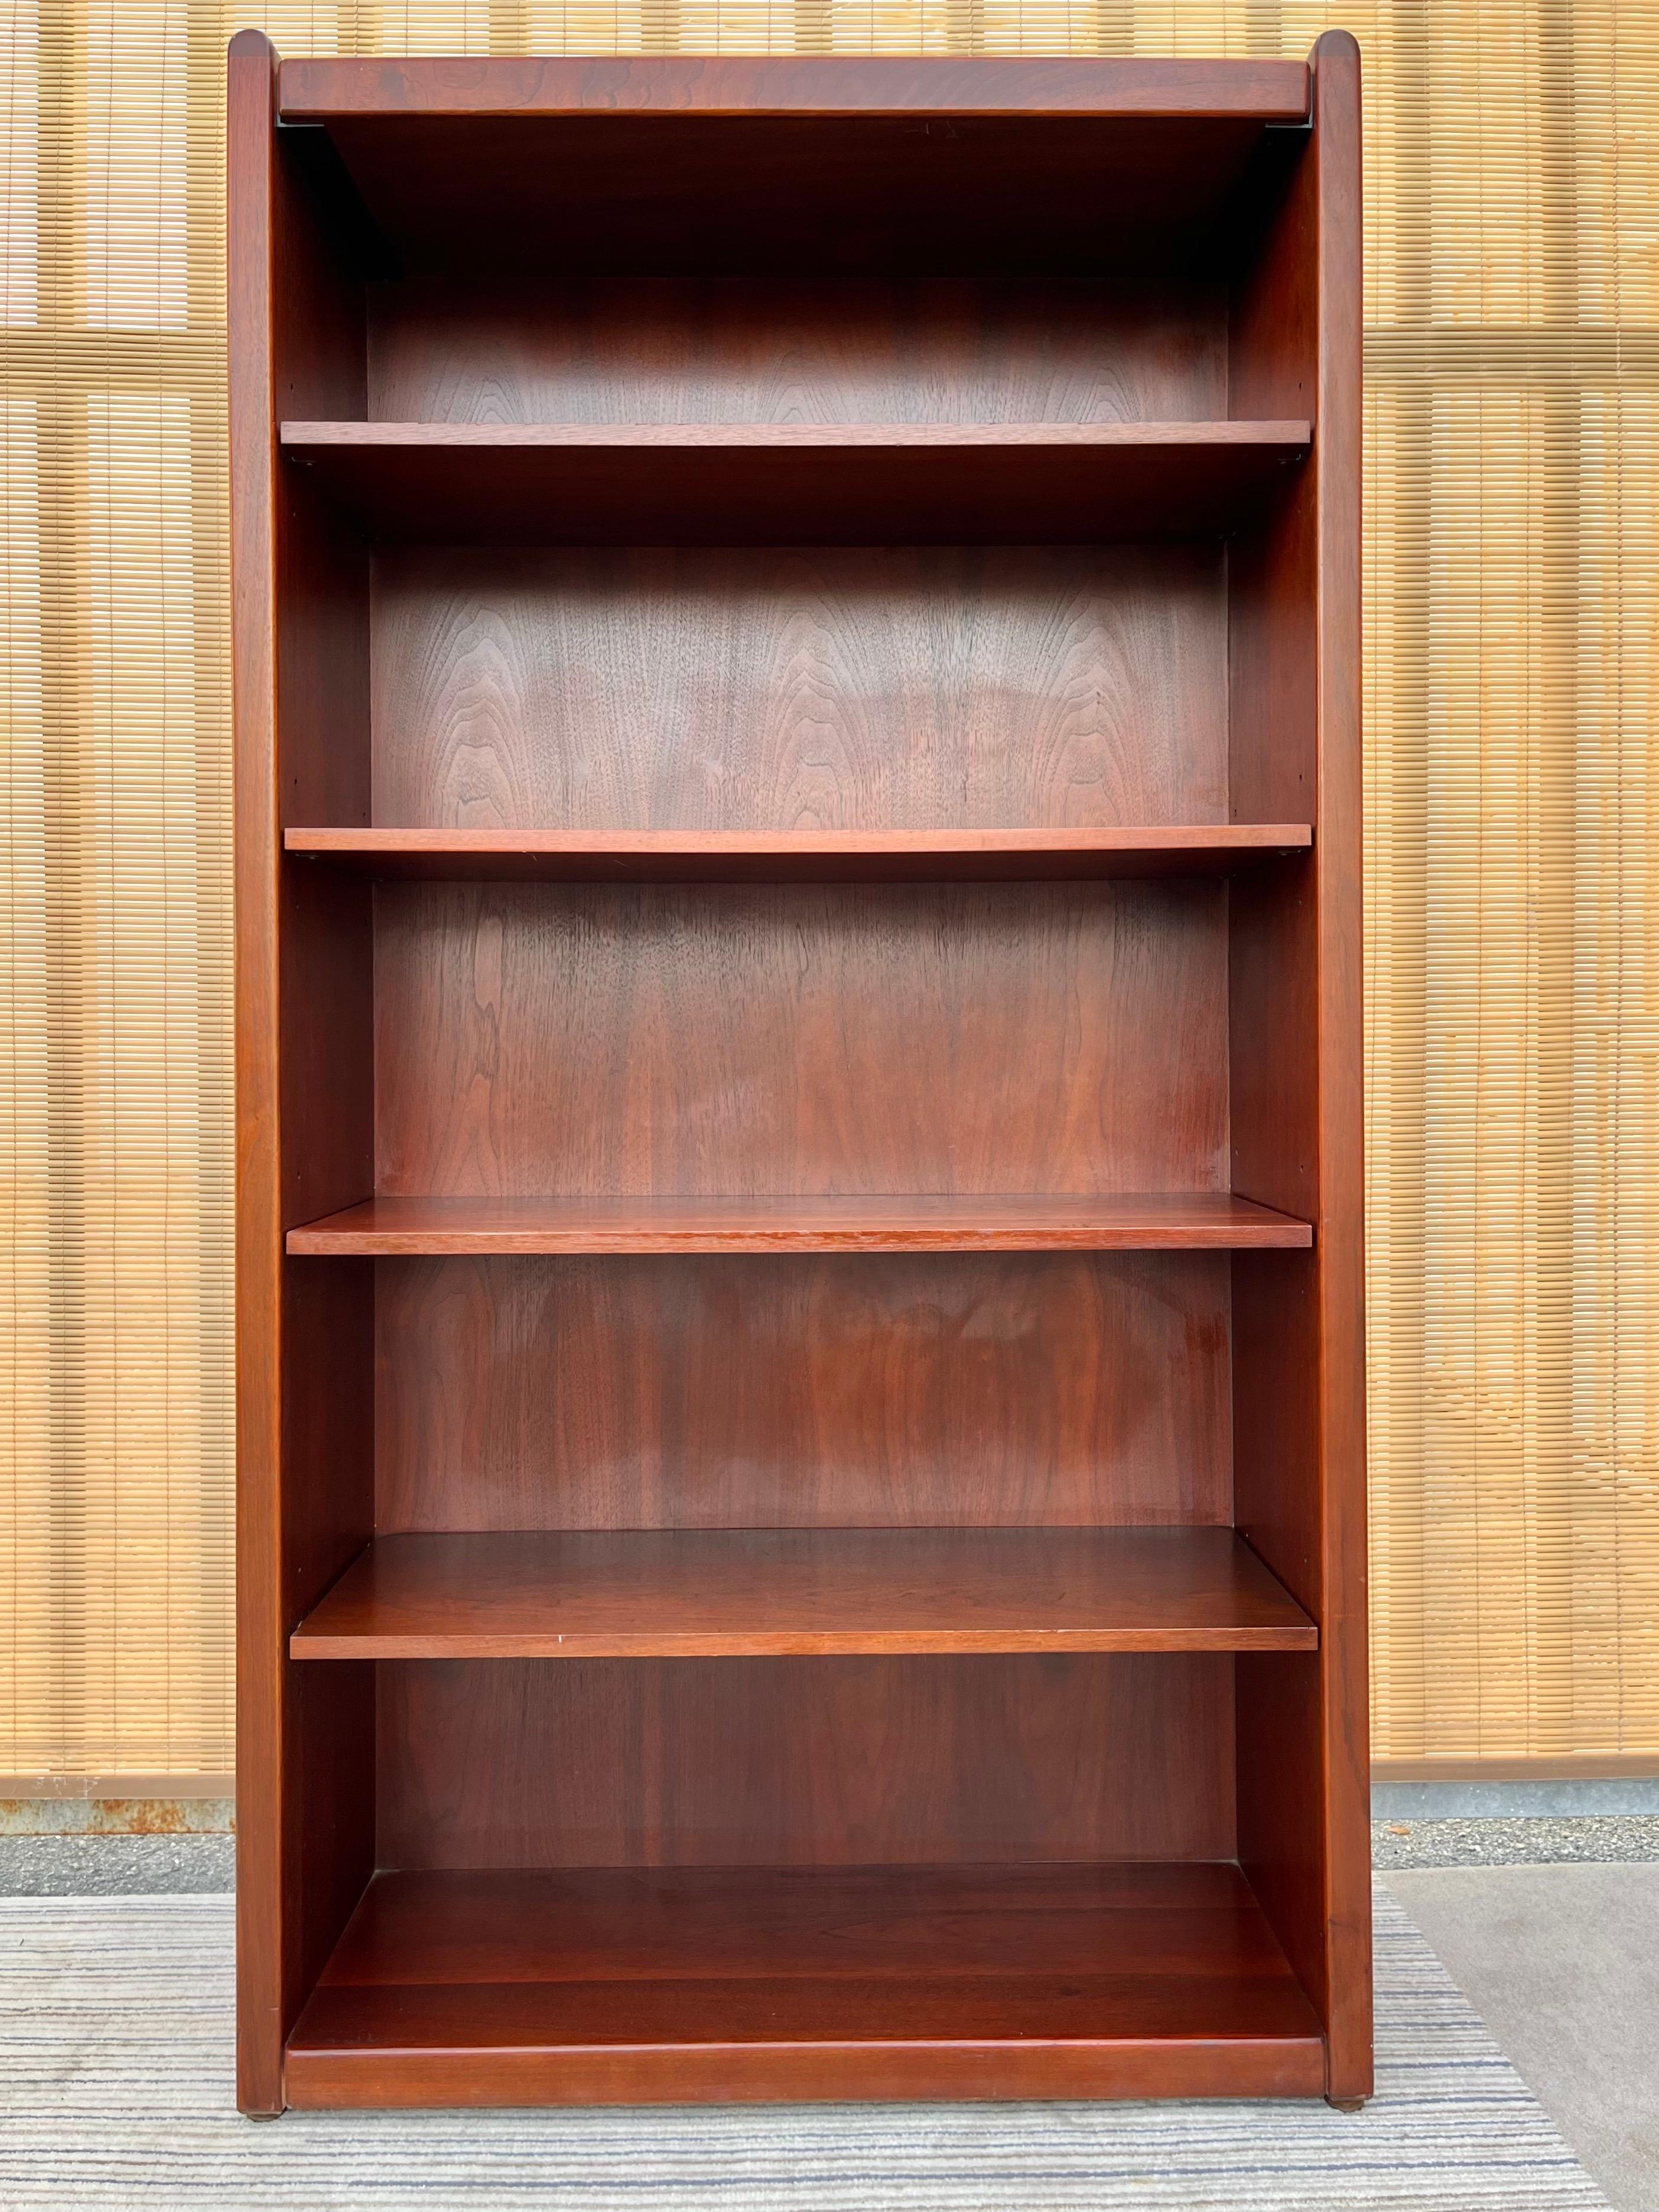 Late 20th century 5 shelves open bookcase by Kimball Furniture. Circa 1990s. 
This robust open bookcase features a clean line design with rounded top edges, four adjustable wood shelves with metal brackets, a beautiful dark cherry wood grain finish